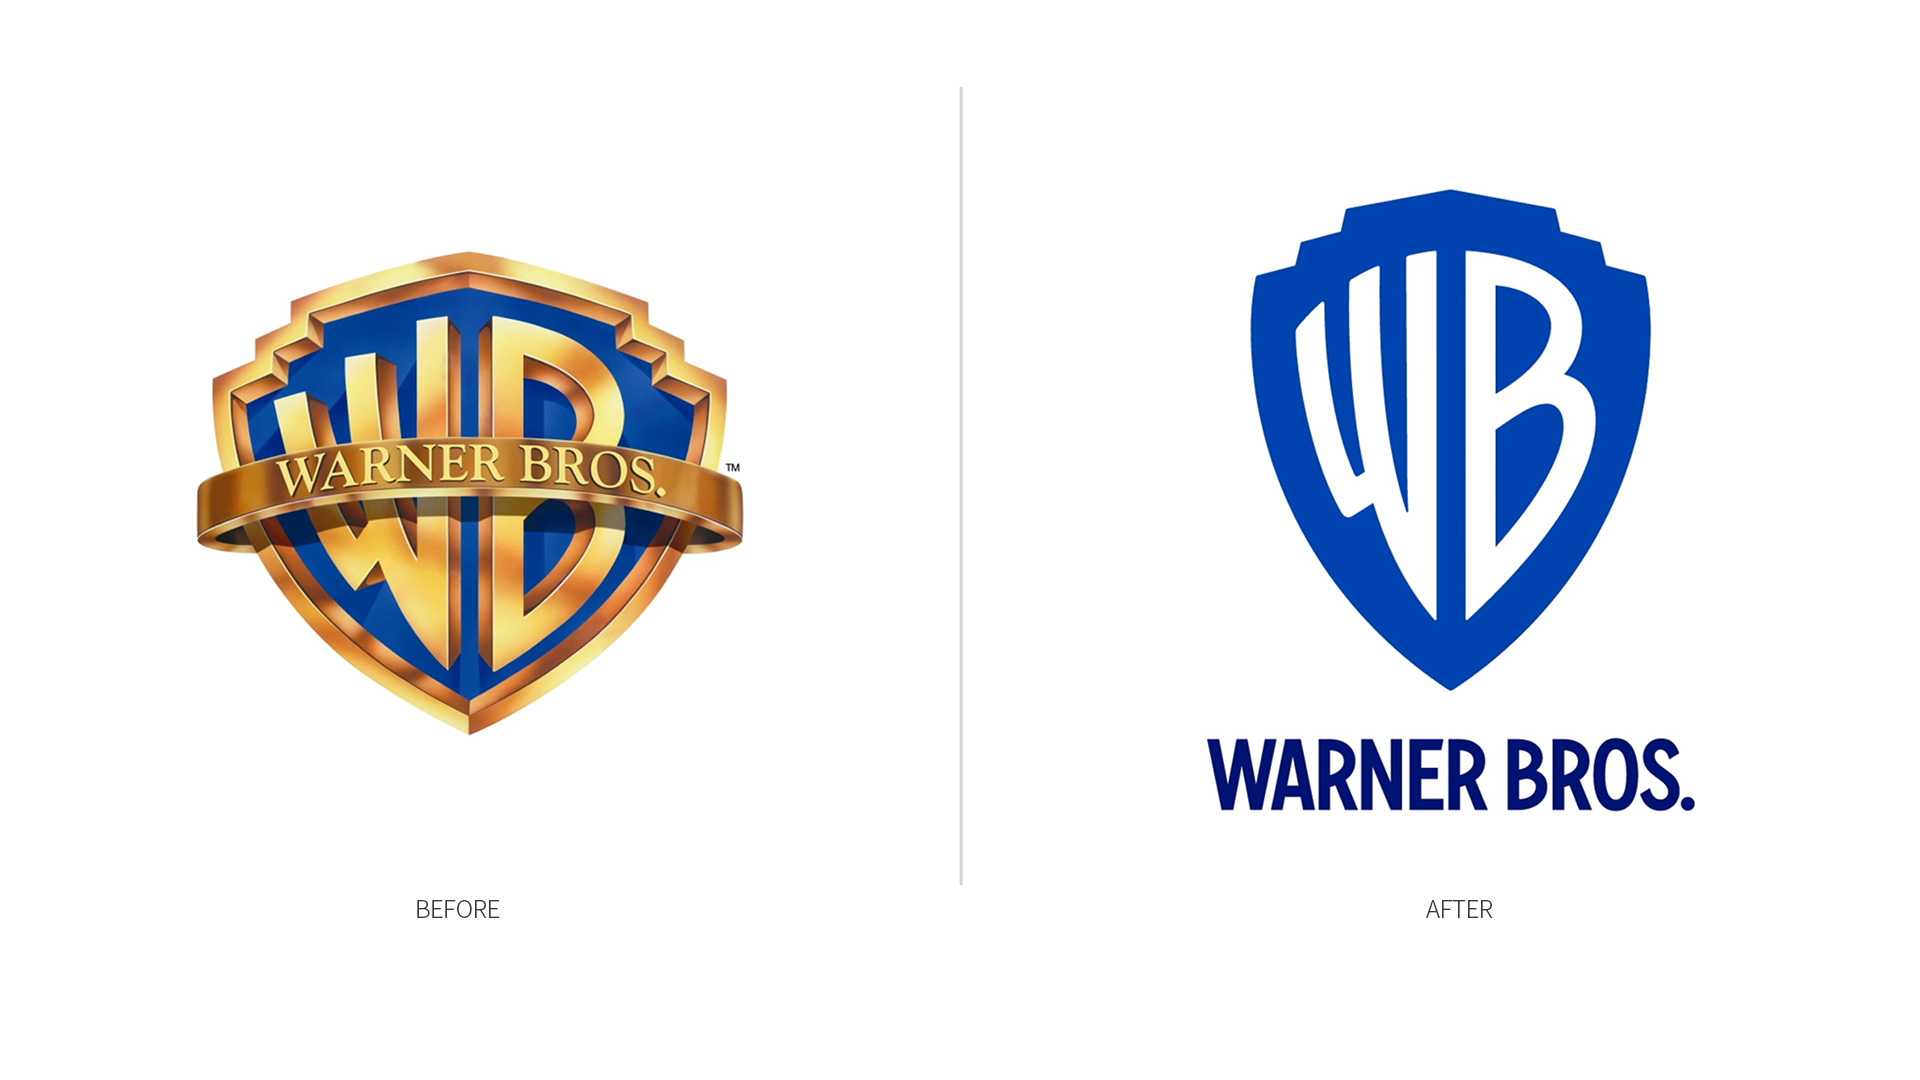 Brand New: New Logo and Identity for Warner Bros. by Pentagram